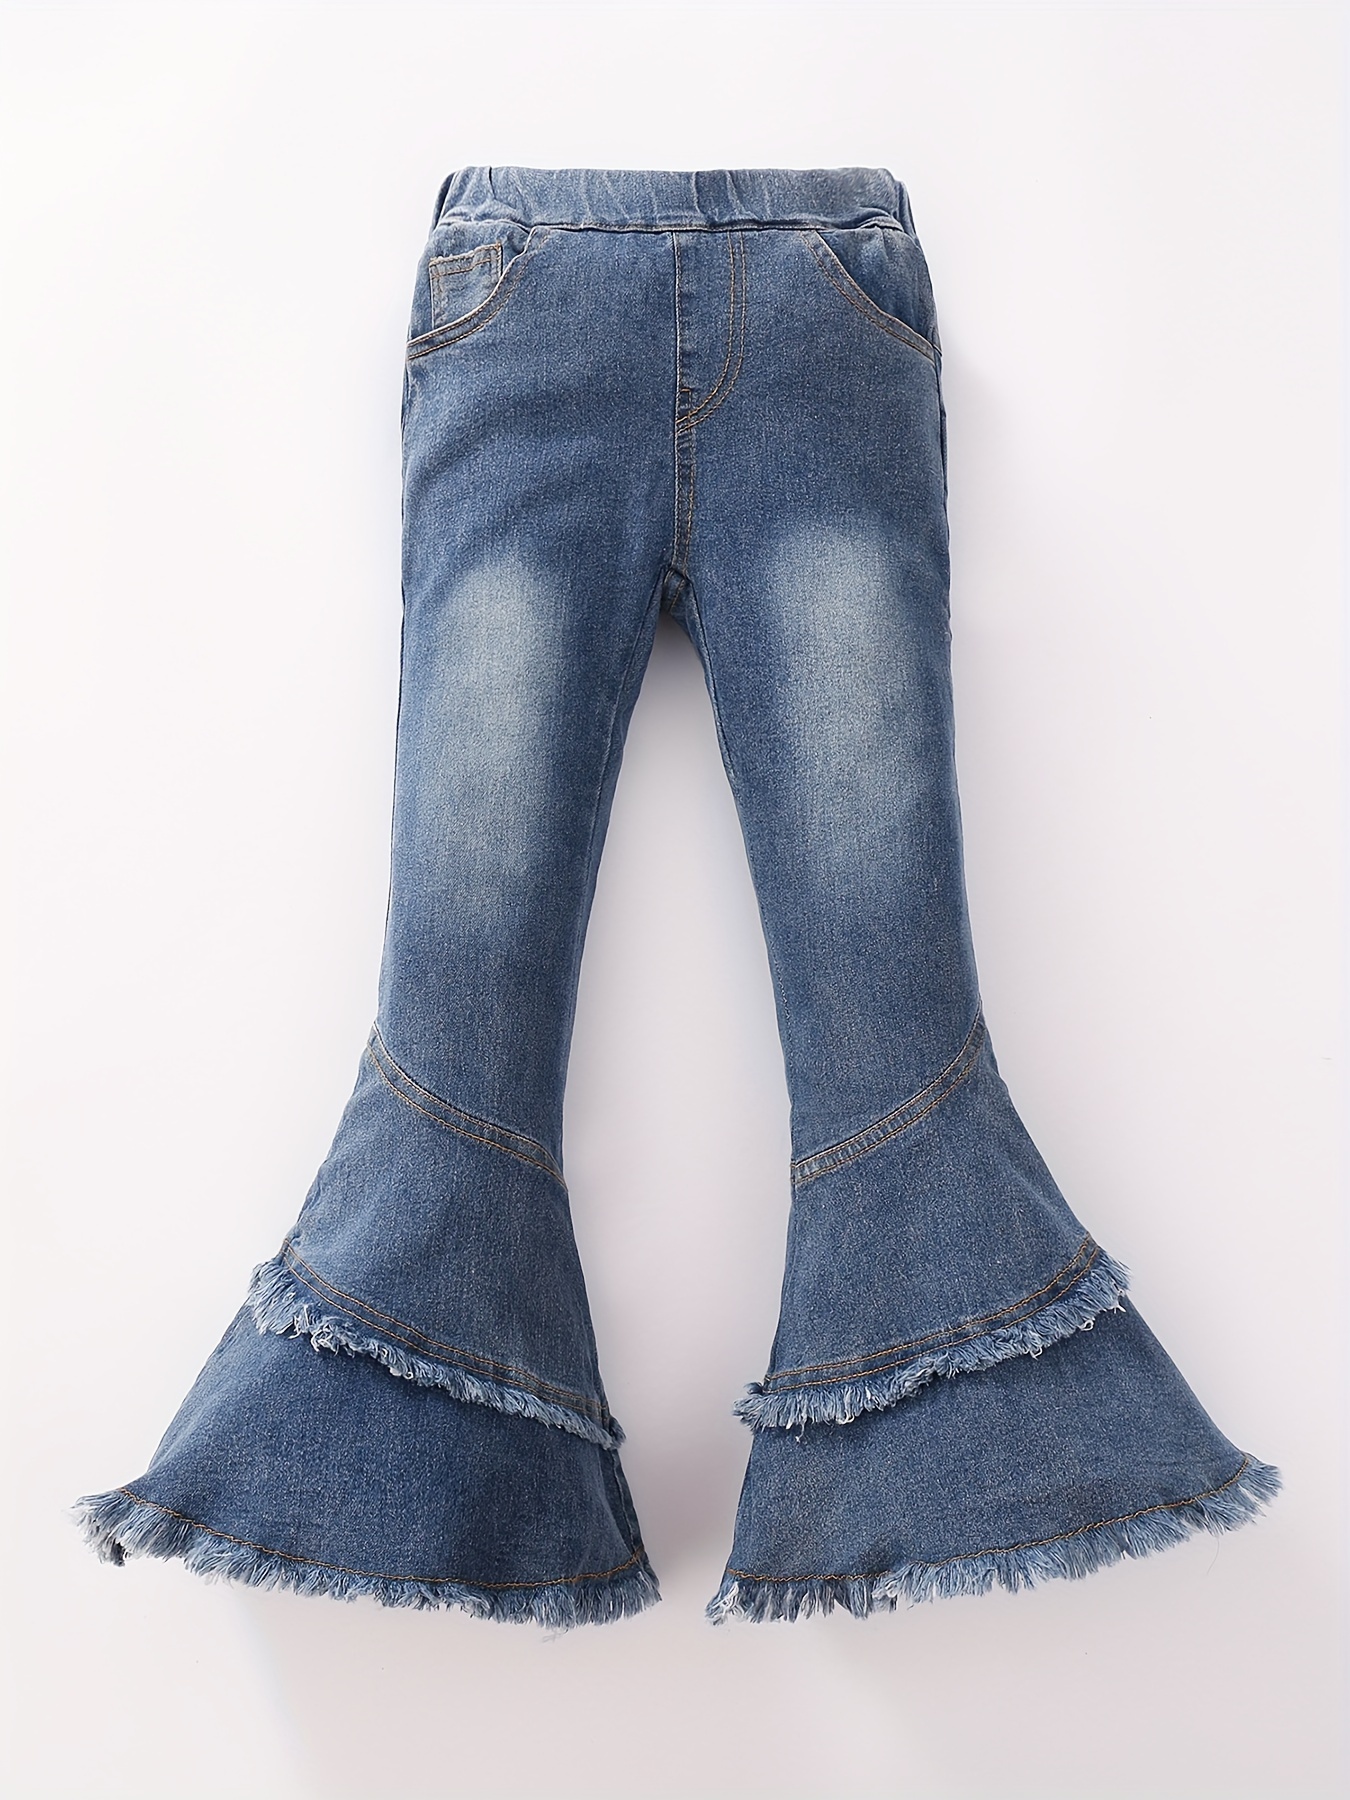 Girls Fashion Flared Washed Denim Pants, Trousers with Lace Trim, Comfortable Casual Jeans for Toddlers Kids Children,Temu